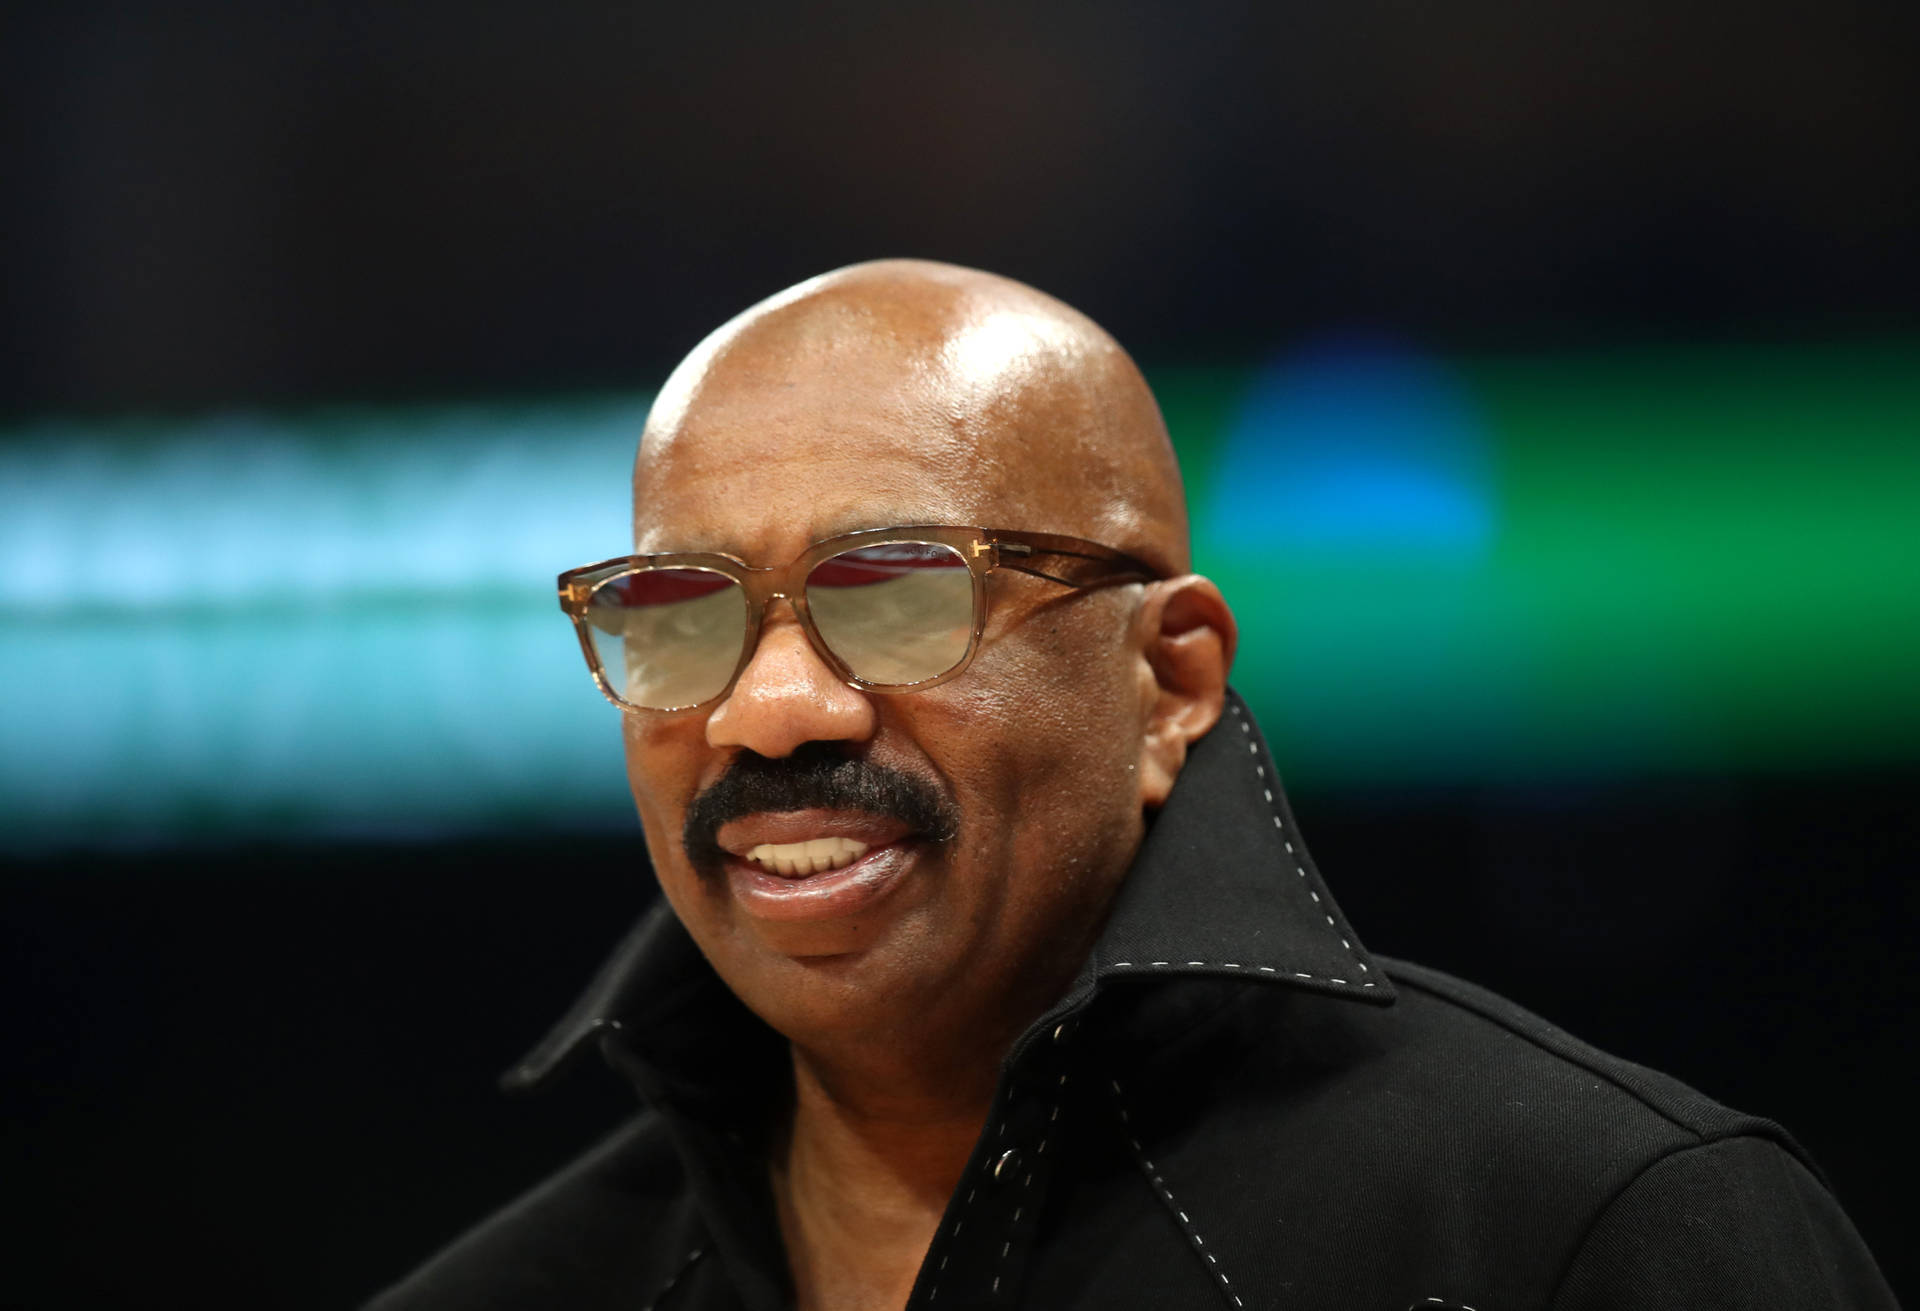 Steve Harvey Smiling In Coat And Sunglasses Background